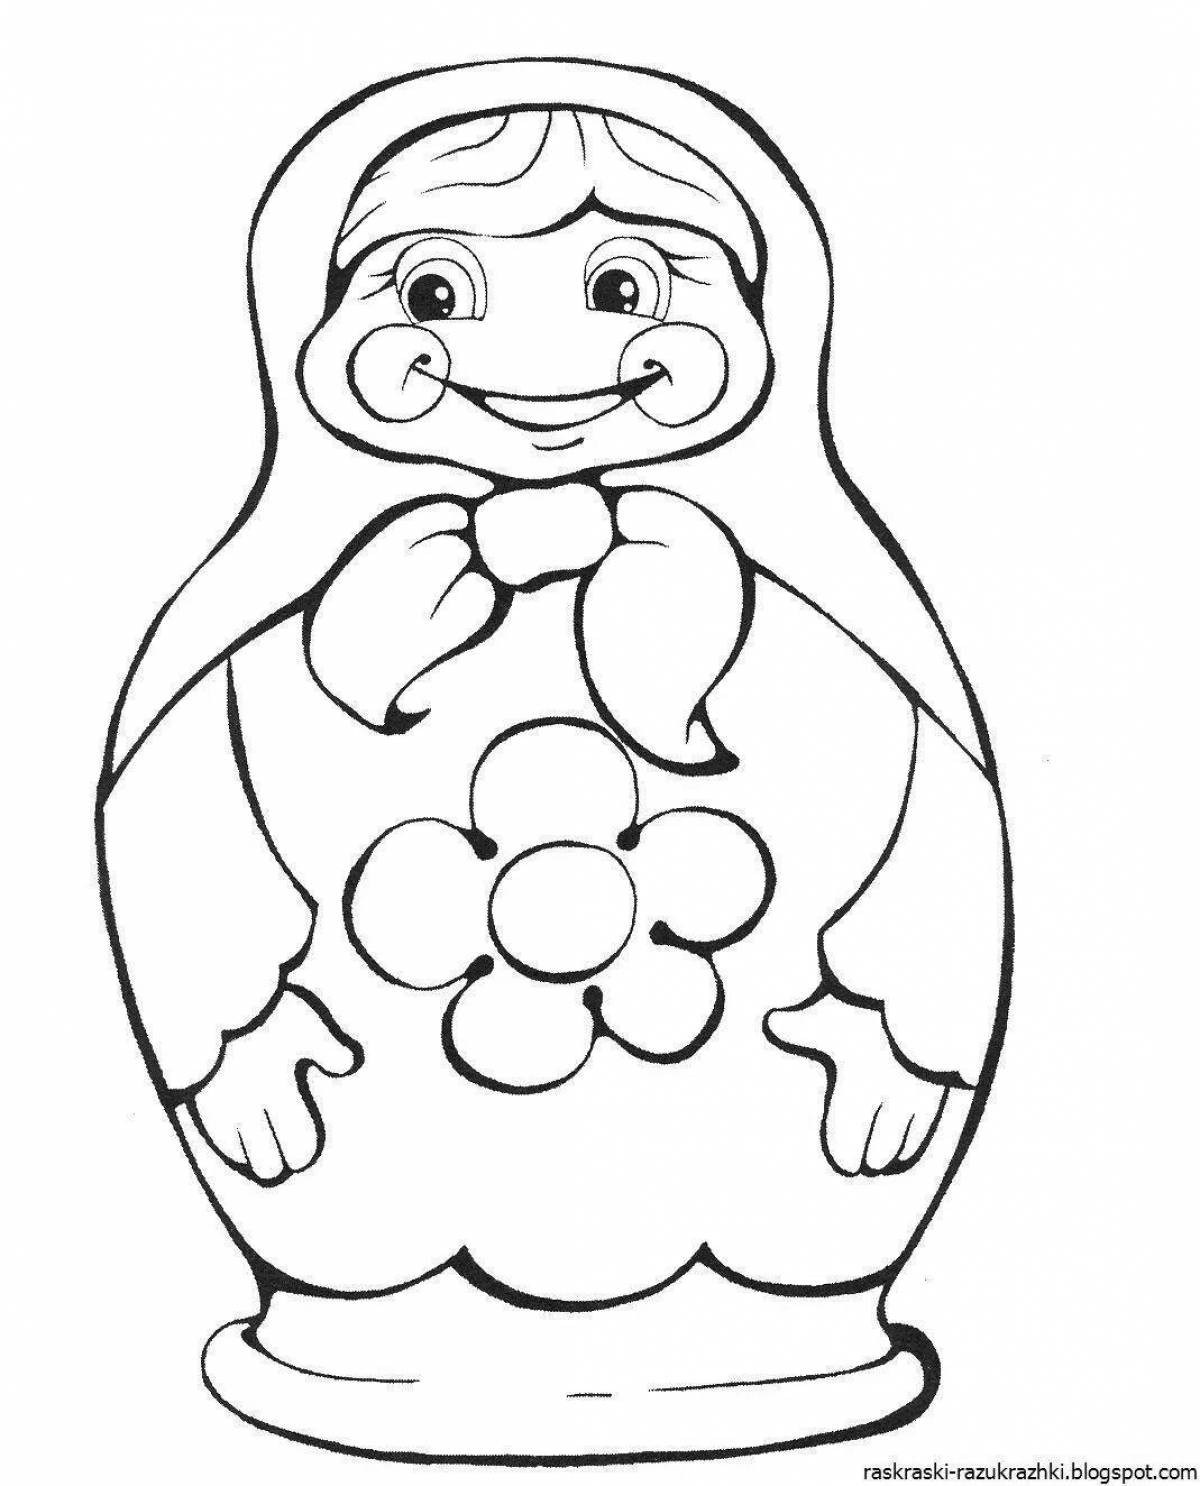 Fabulous matryoshka coloring book for children 5-6 years old